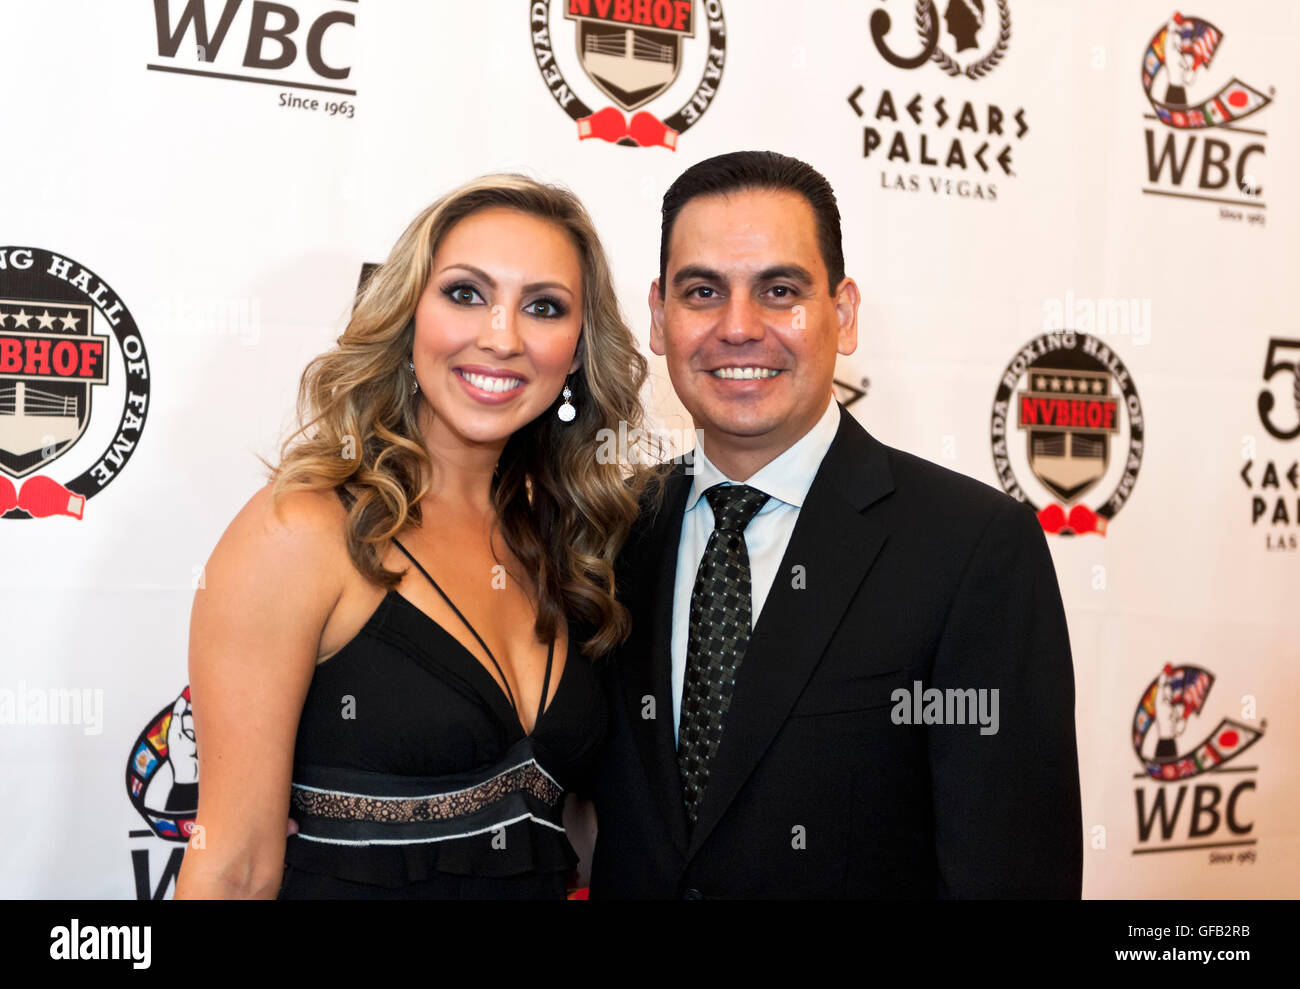 Caesars Palace, Las Vegas, Nevada, USA. 30th July, 2016. Crystina Poncher and Bernardo Osuna on the red carpet at the 4th Annual Nevada Boxing Hall of Fame Induction Ceremony Credit:  Ken Howard/Alamy Live News Stock Photo